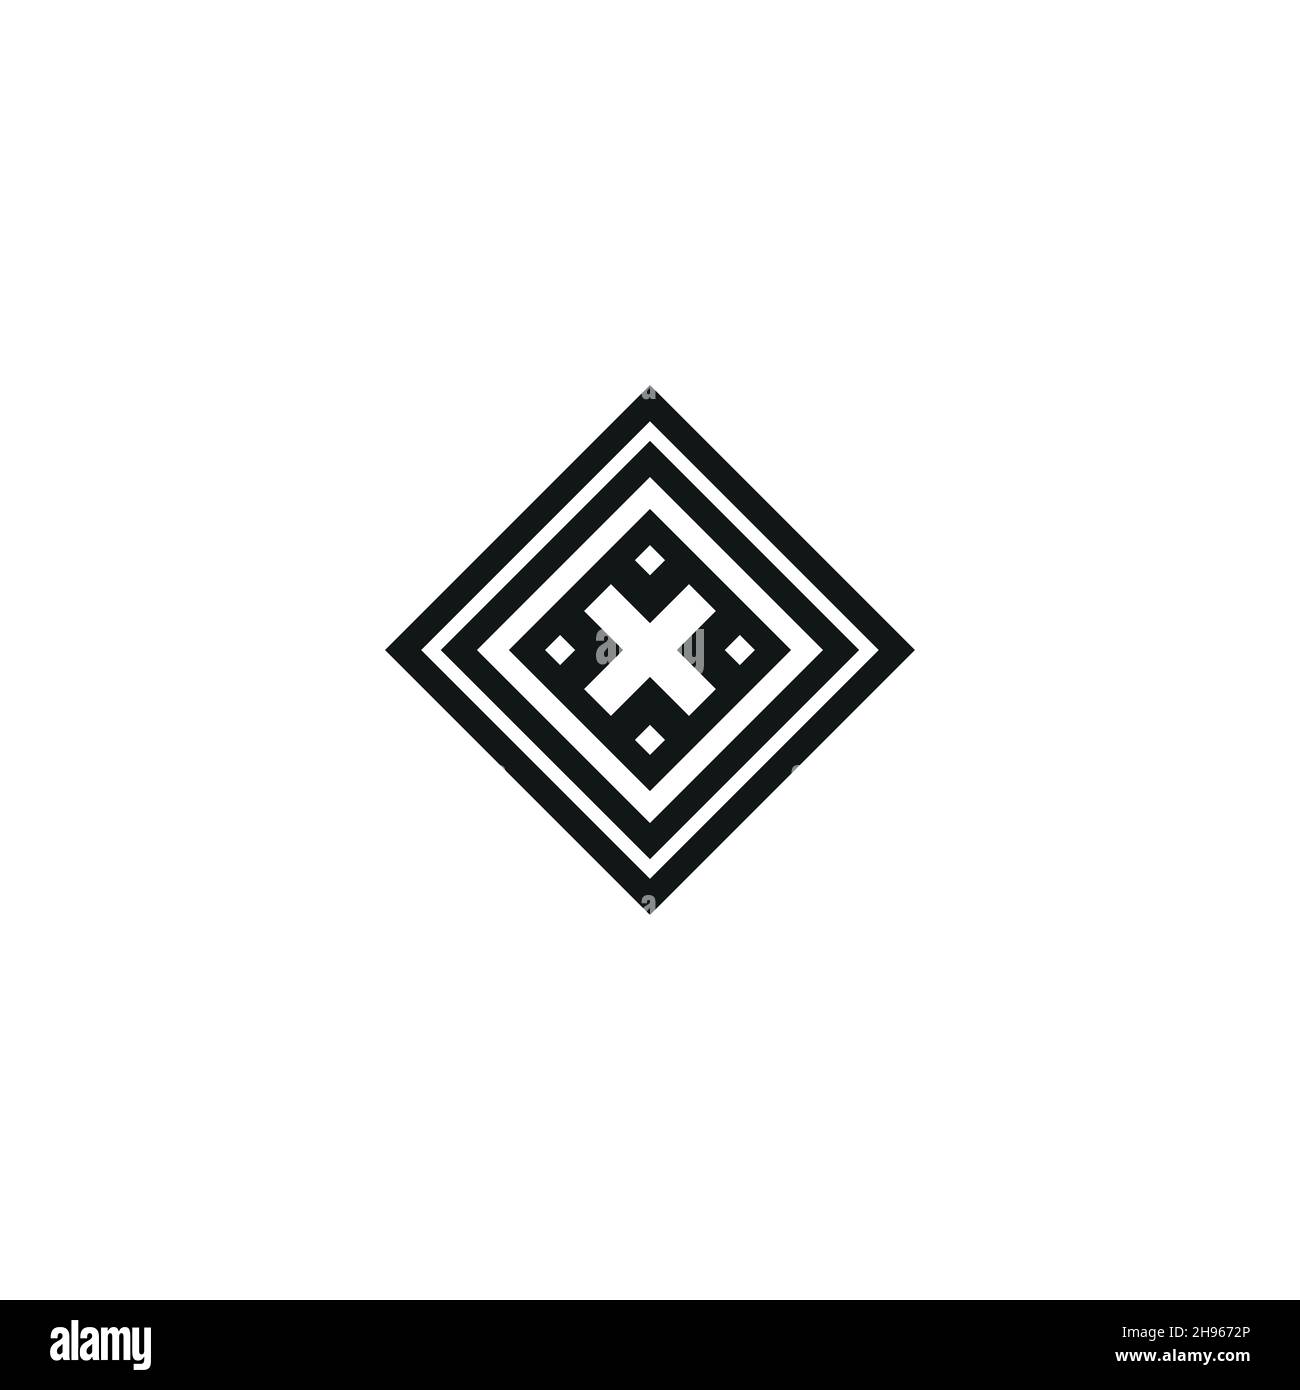 Vector icon: Celtic knot, triquetra cross or Trinity symbol with heart shape. Stock Vector